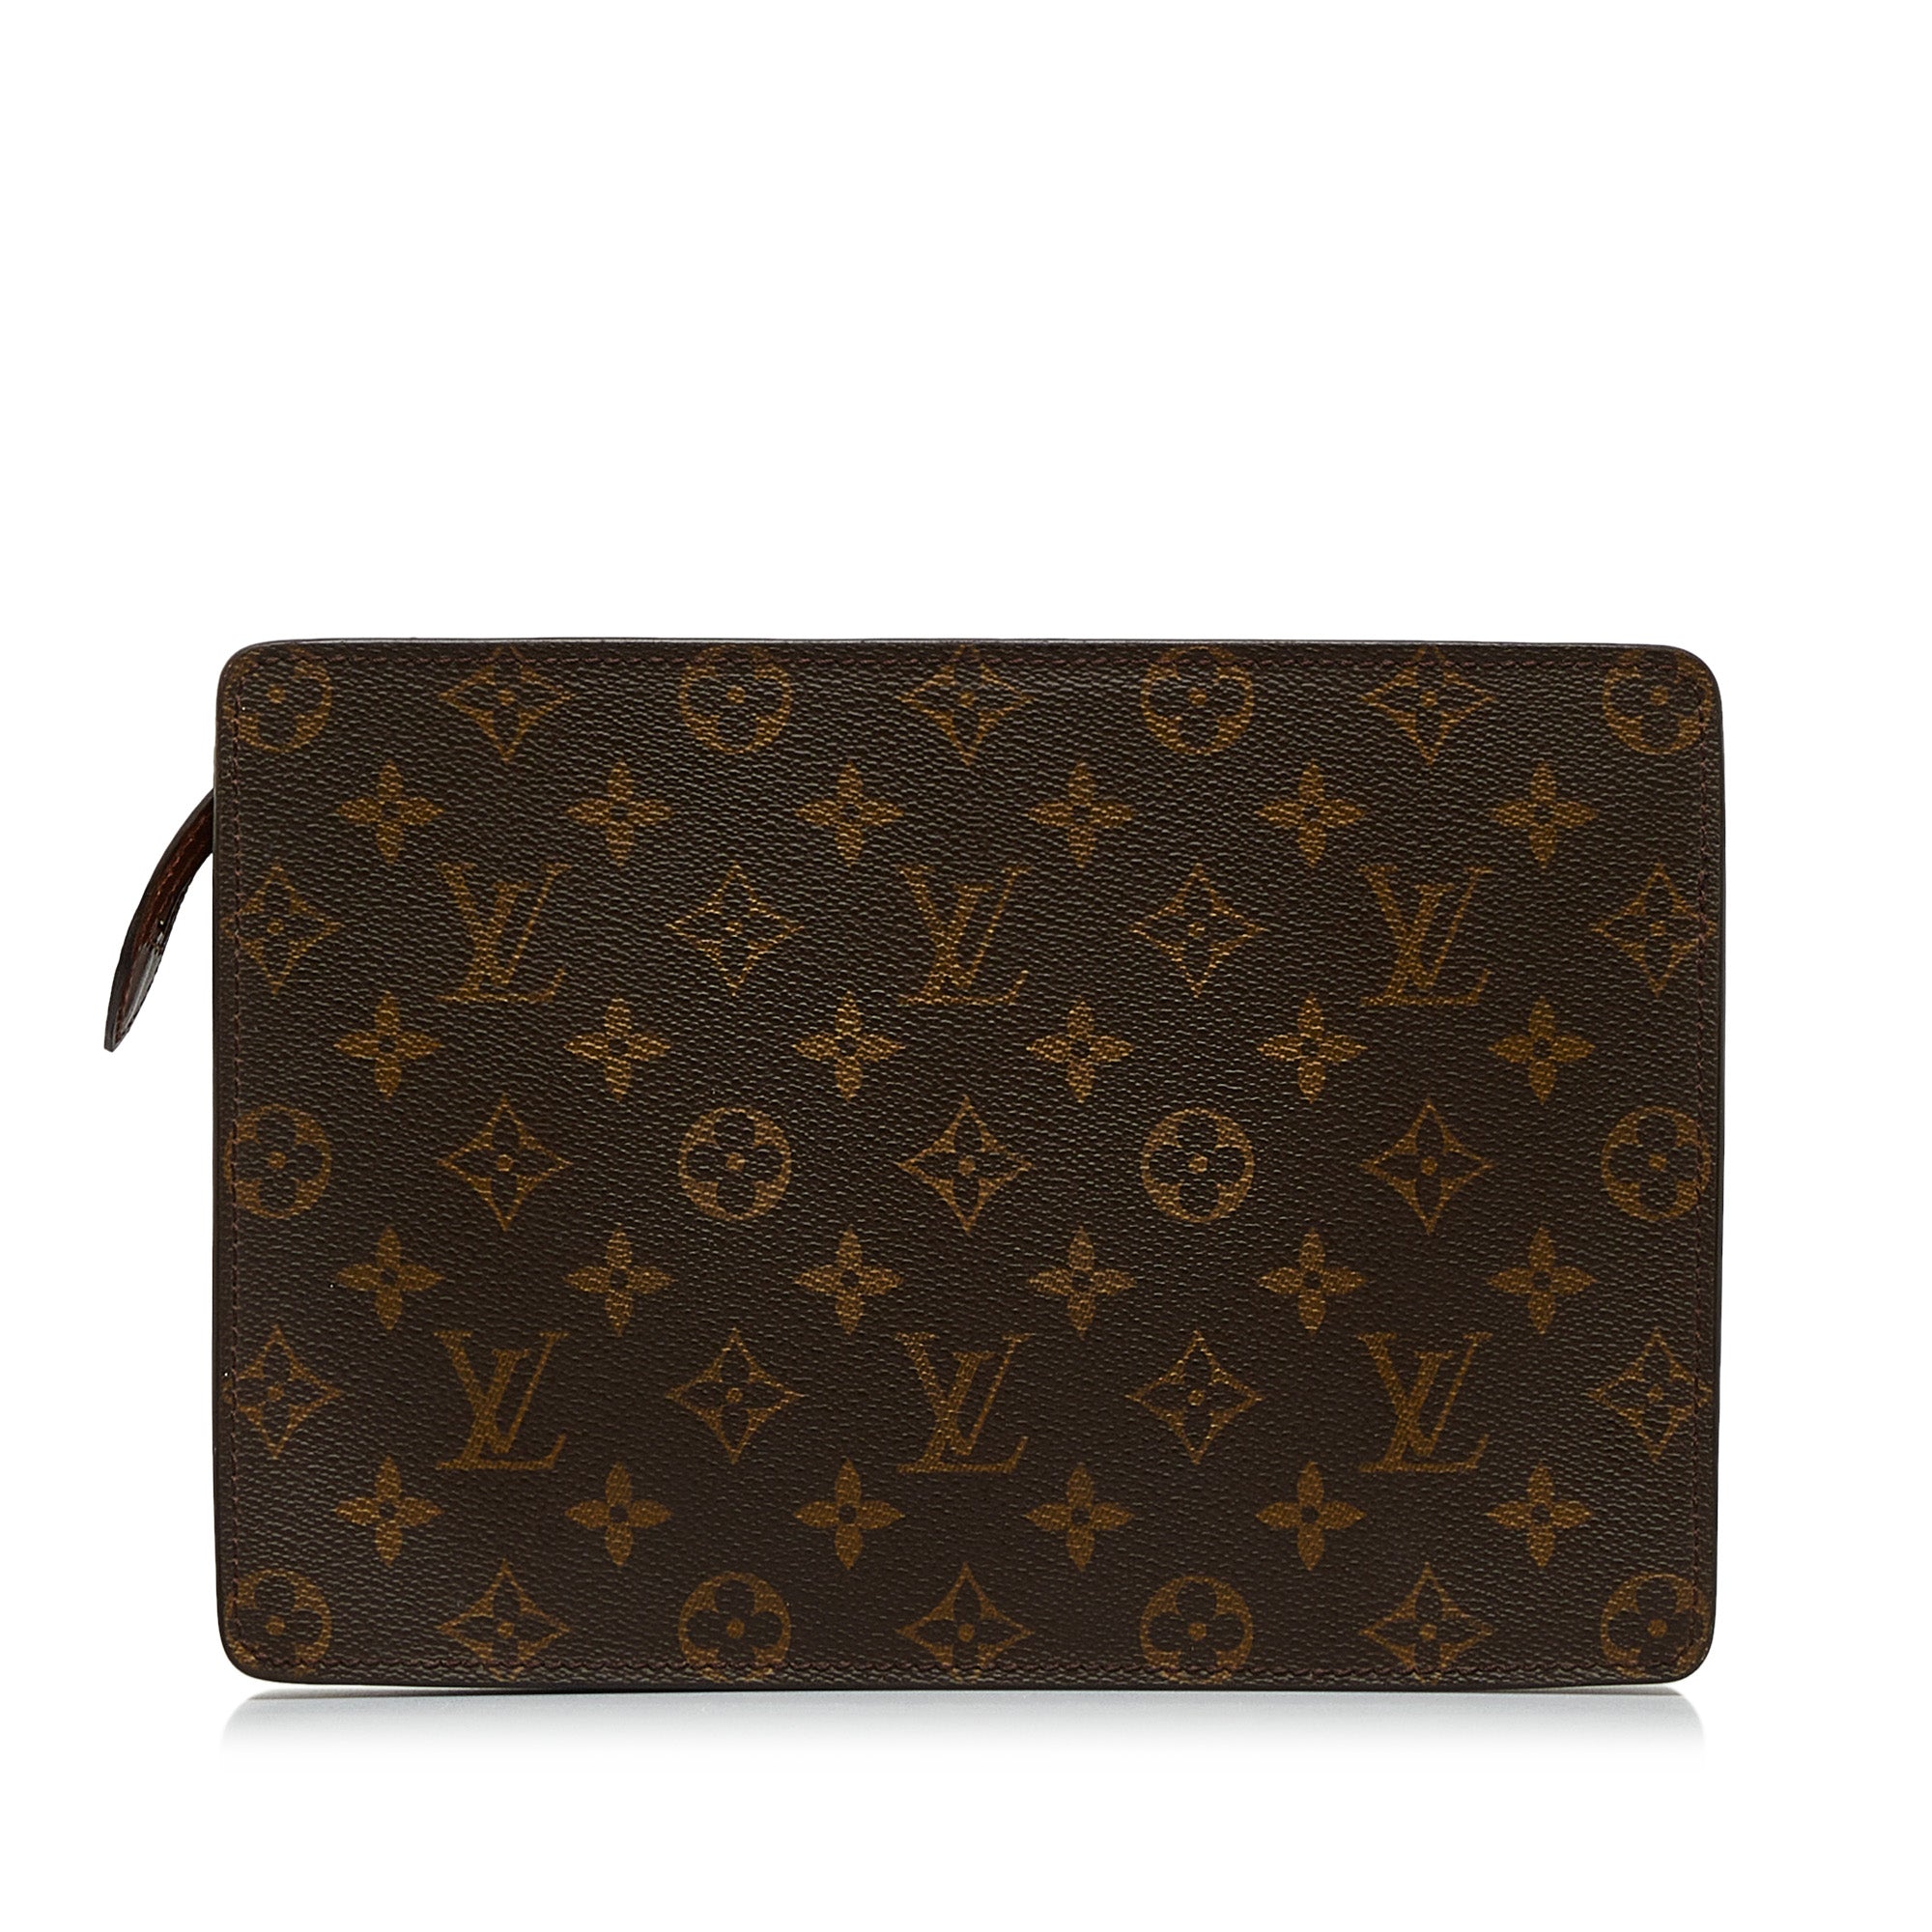 Louis Vuitton - Authenticated Clutch Bag - Cloth Brown for Women, Very Good Condition